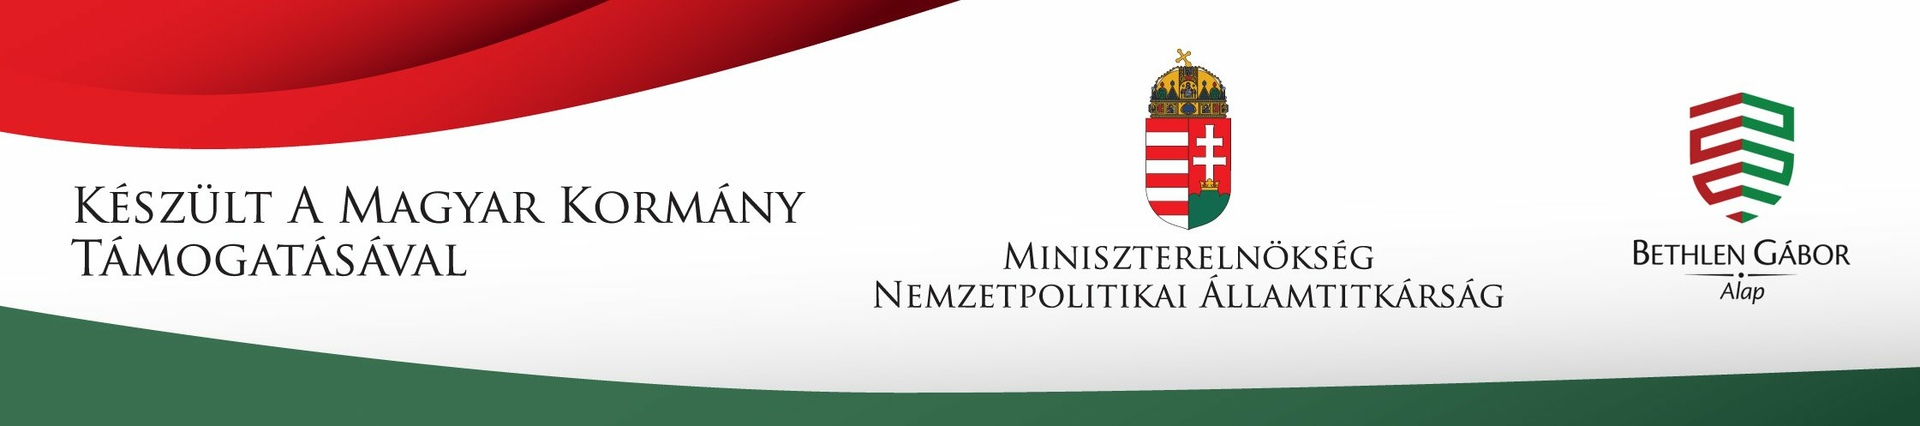 Made with the support of the Hungarian Government